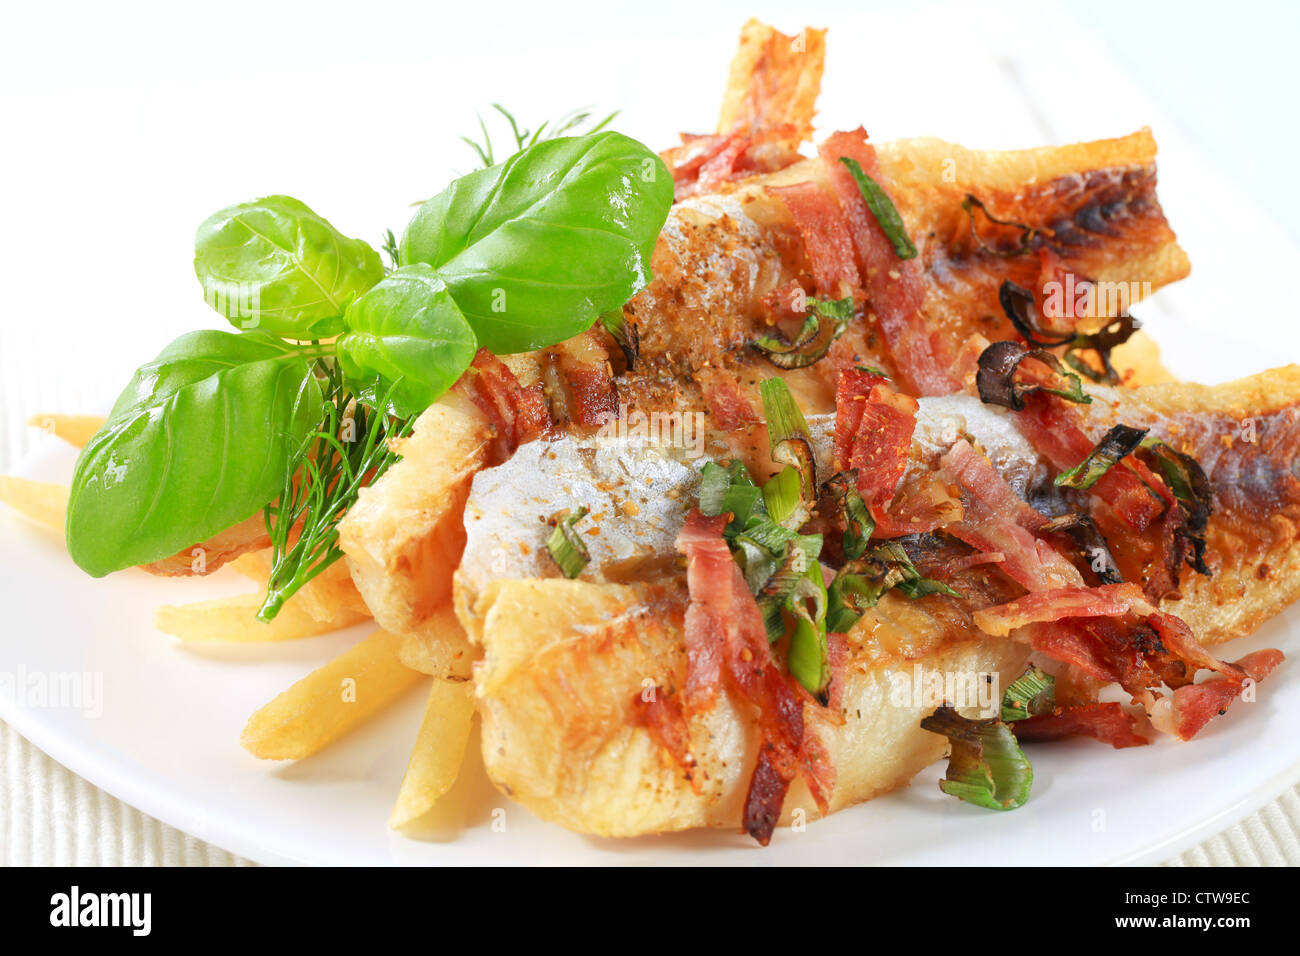 Pan fried fish fillets with French fries Stock Photo